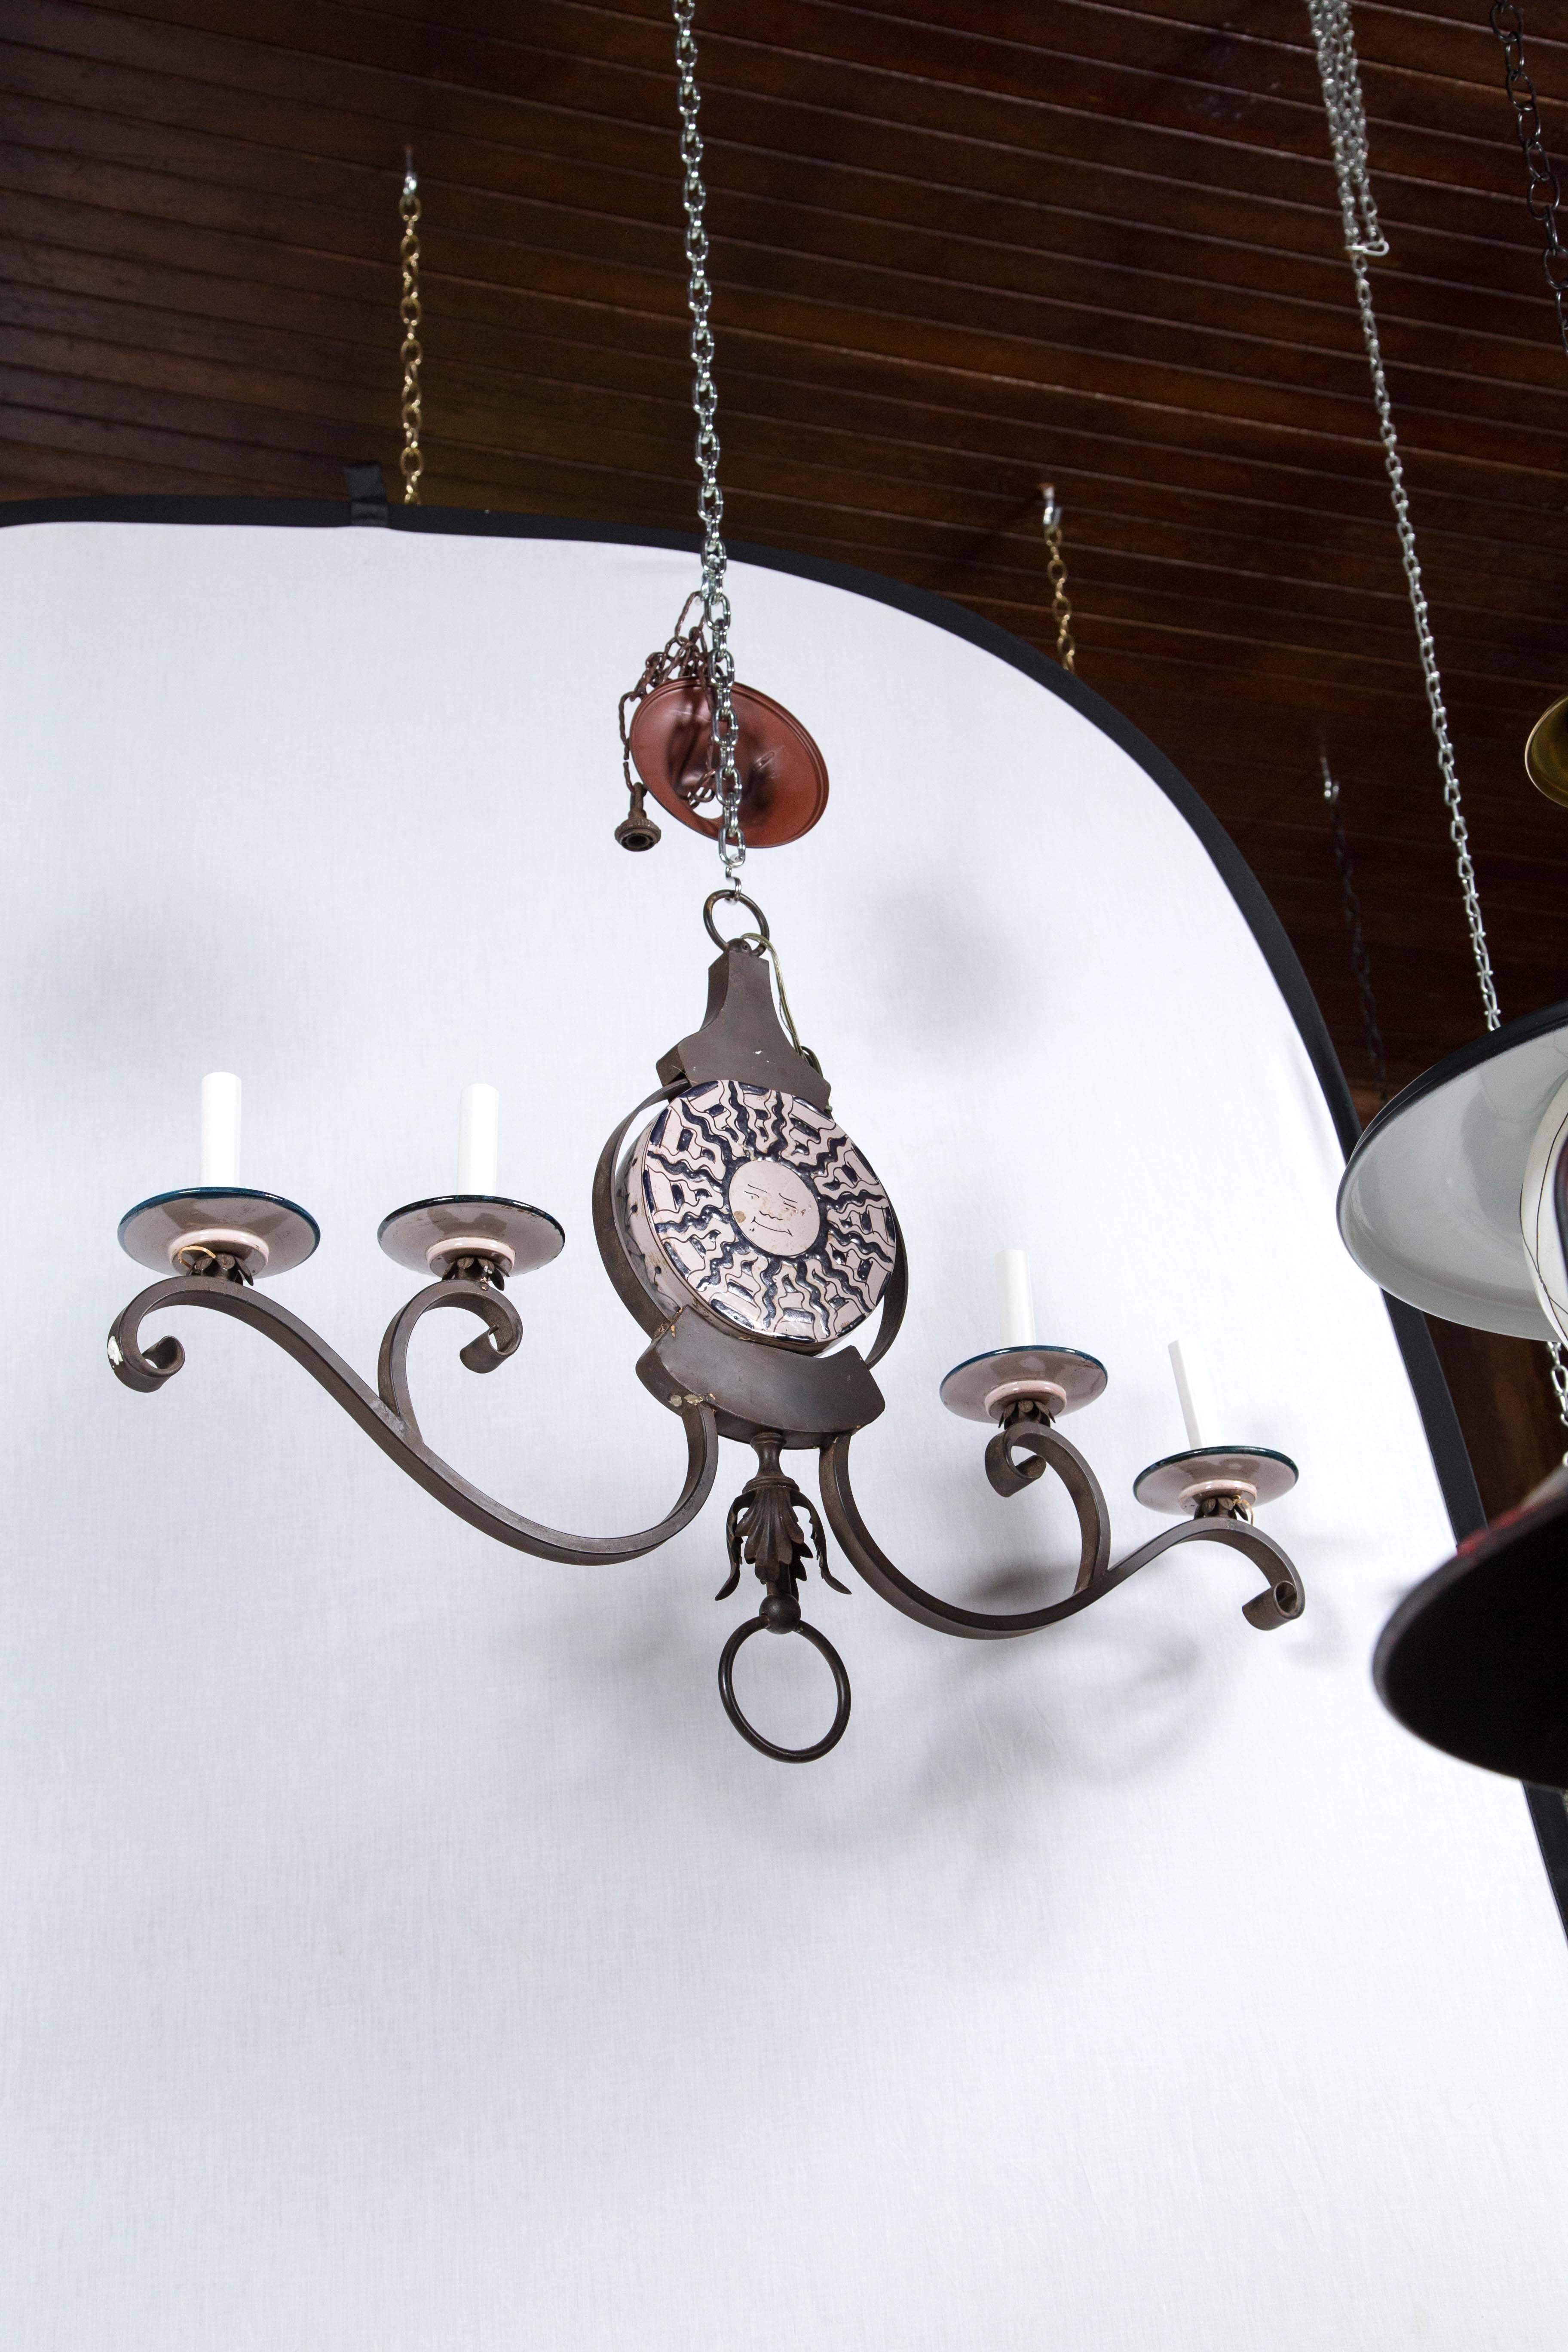 1970s Wrought Iron and Ceramic Chandelier In Excellent Condition For Sale In Stamford, CT